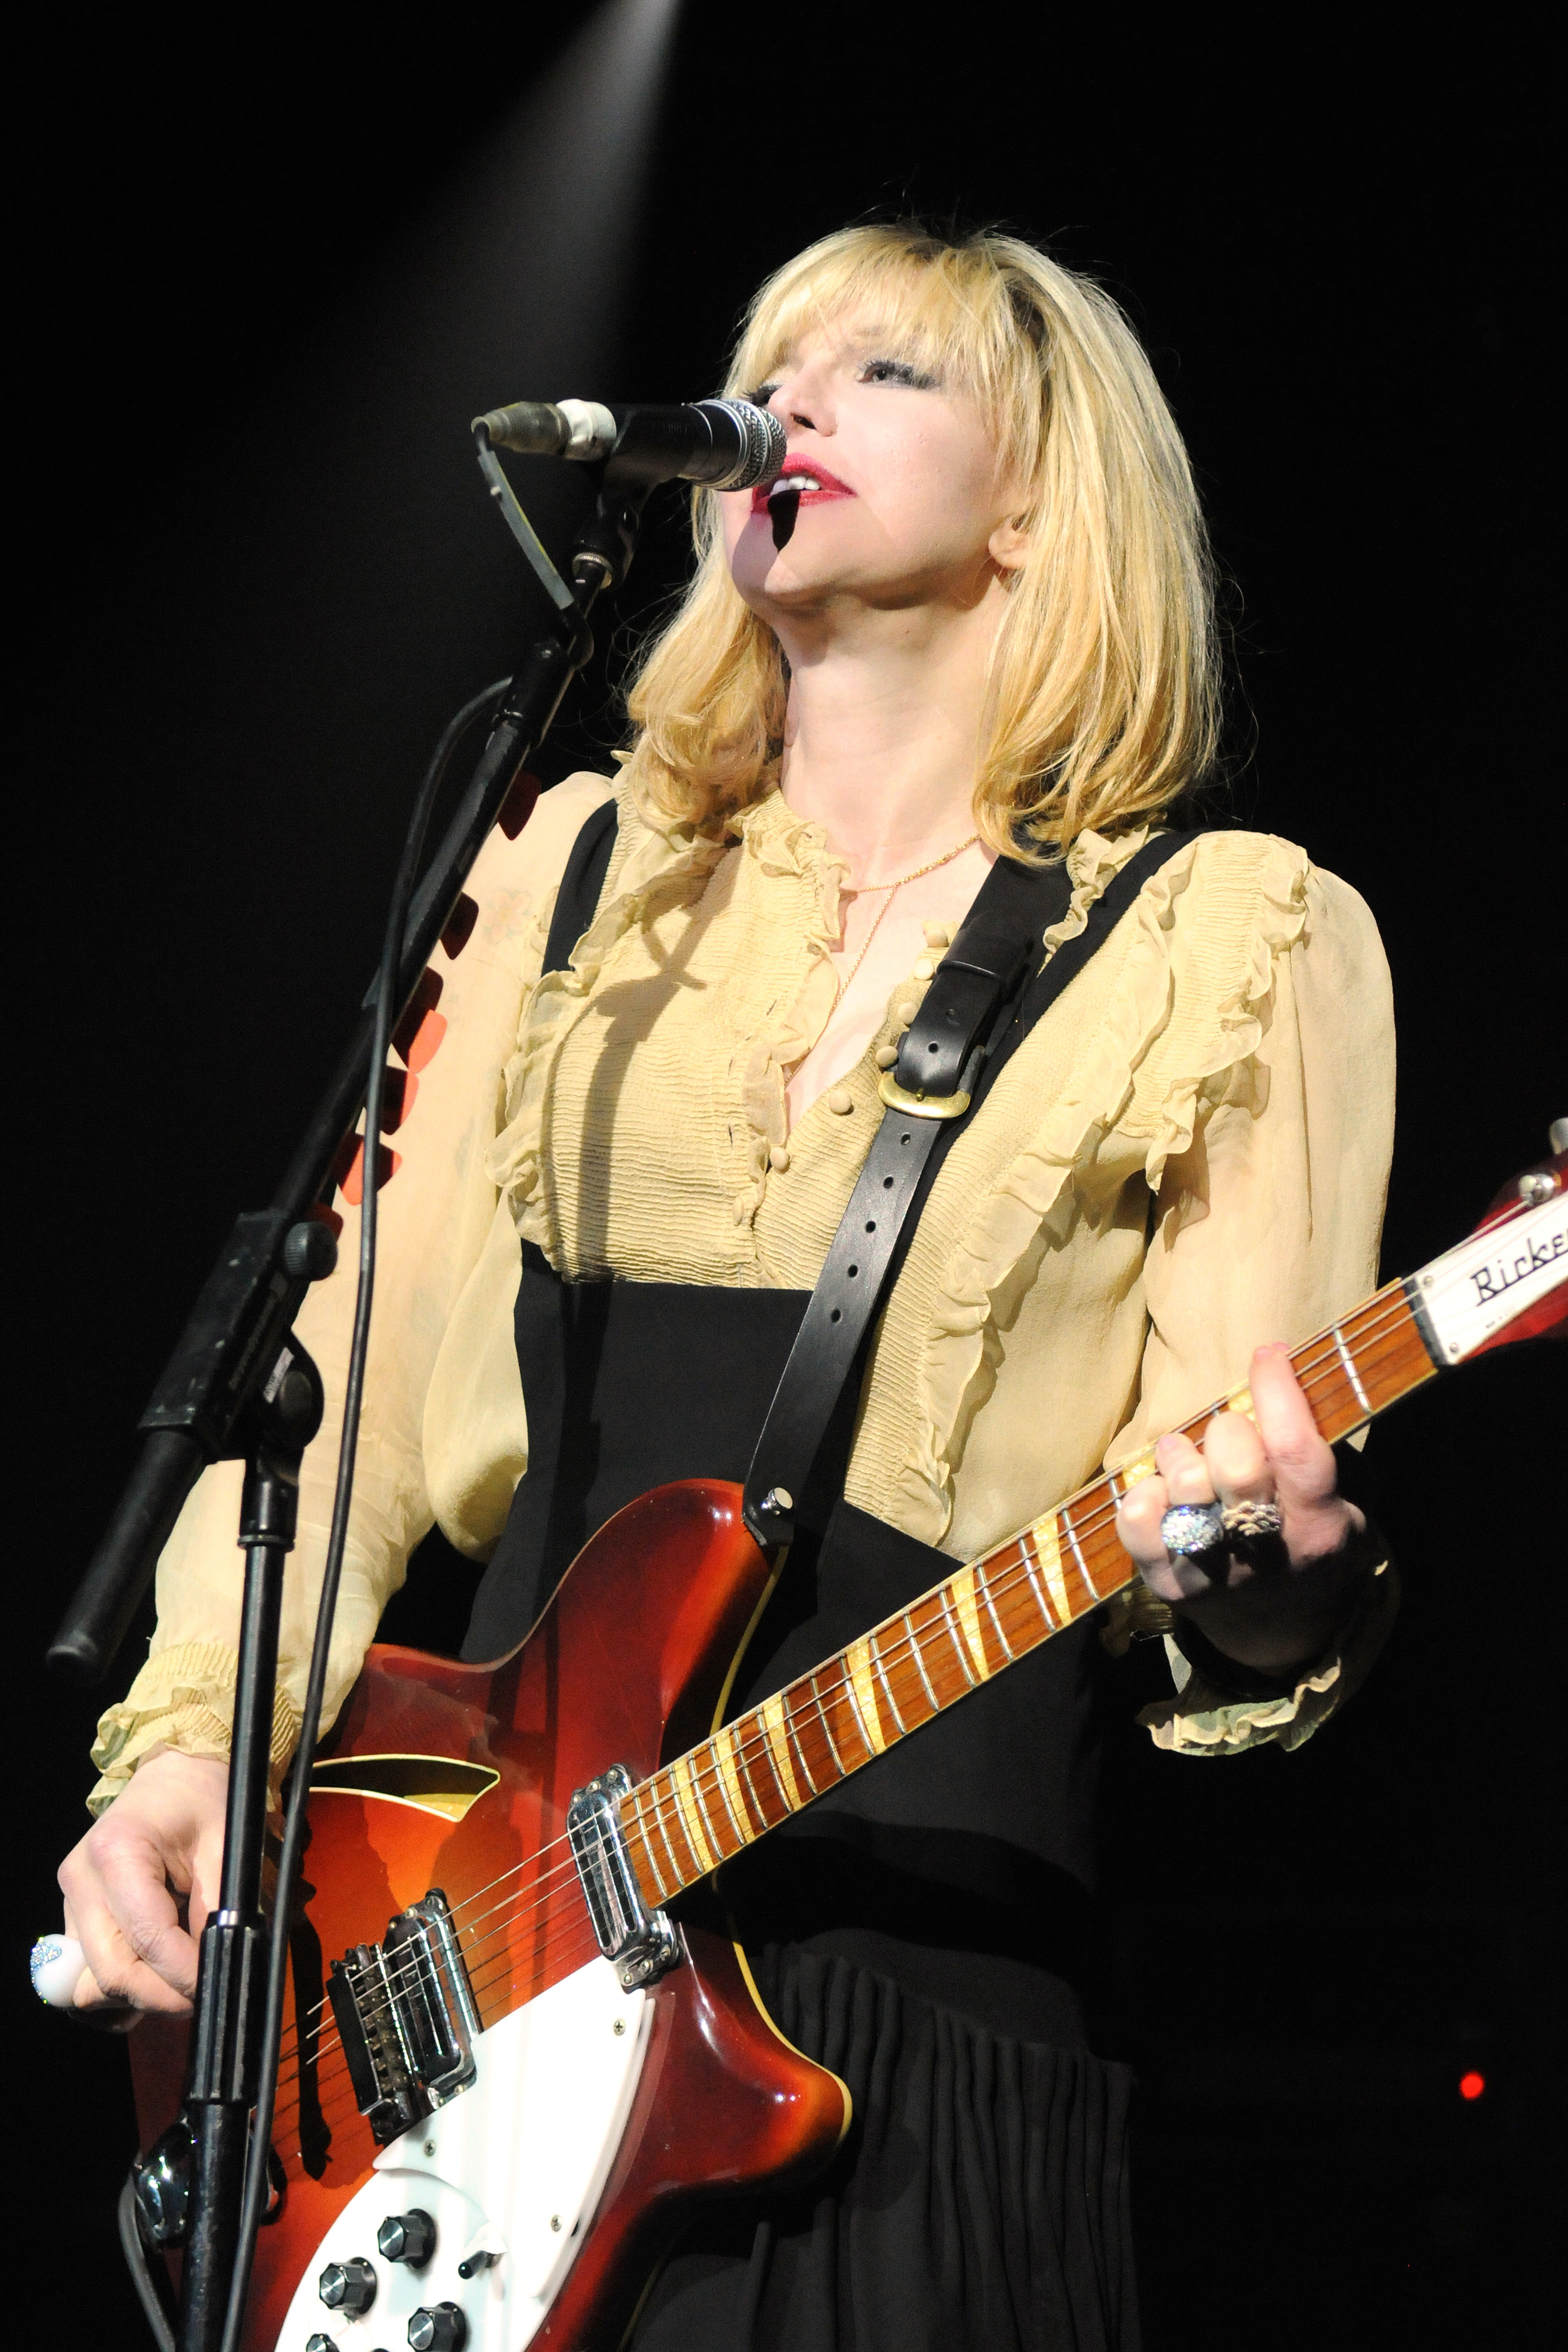 Courtney Love onstage